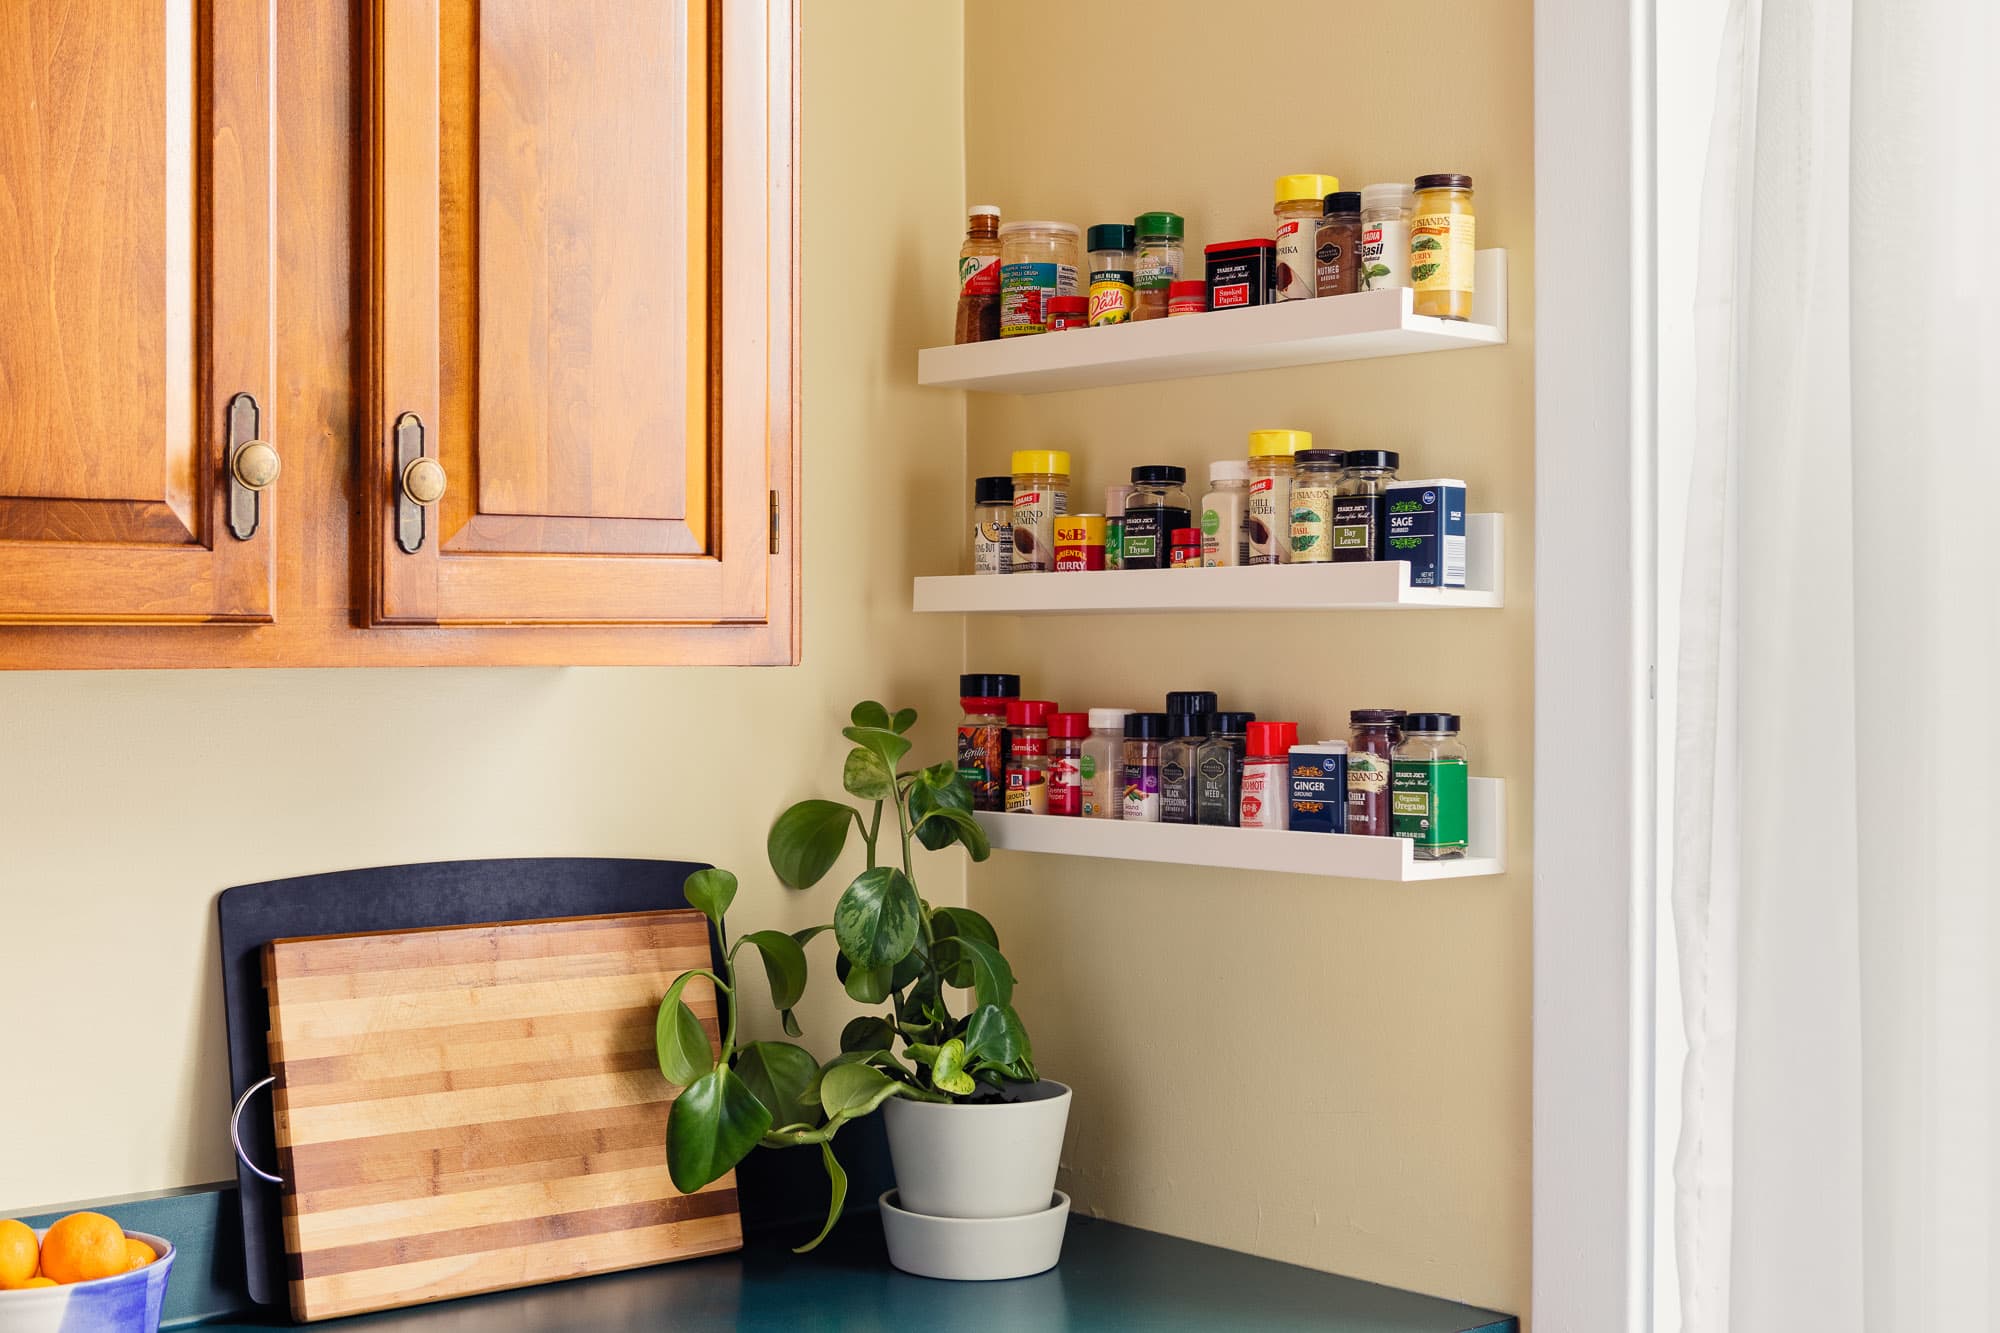 I Finally Organized My Spice Rack and It Made Me Fall in Love with Cooking